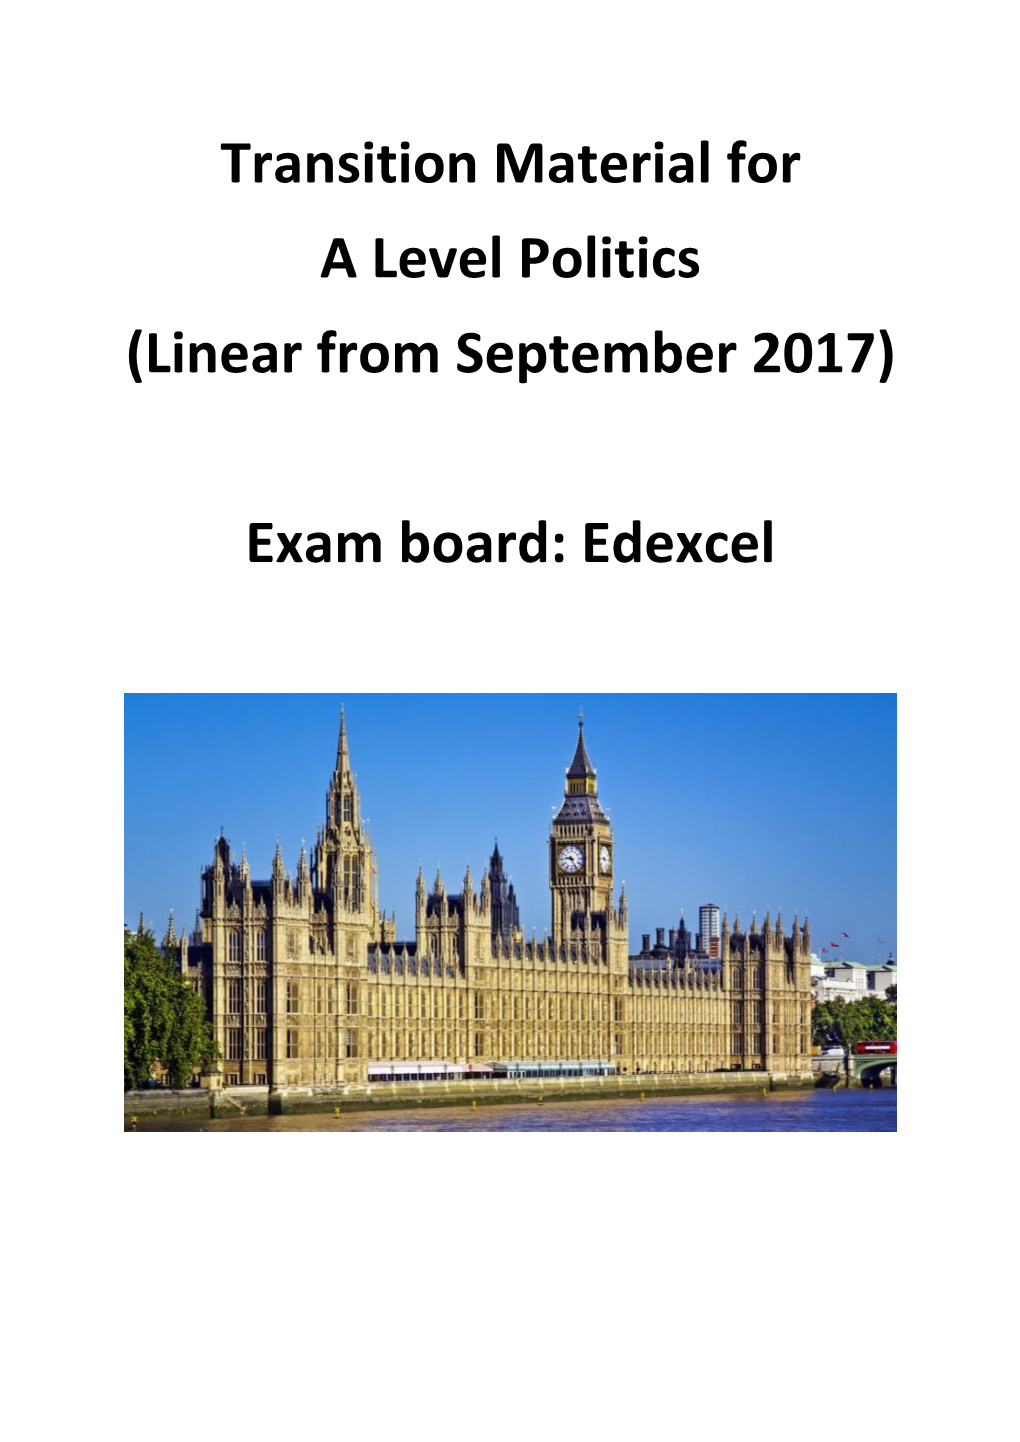 Transition Material for a Level Politics (Linear from September 2017)